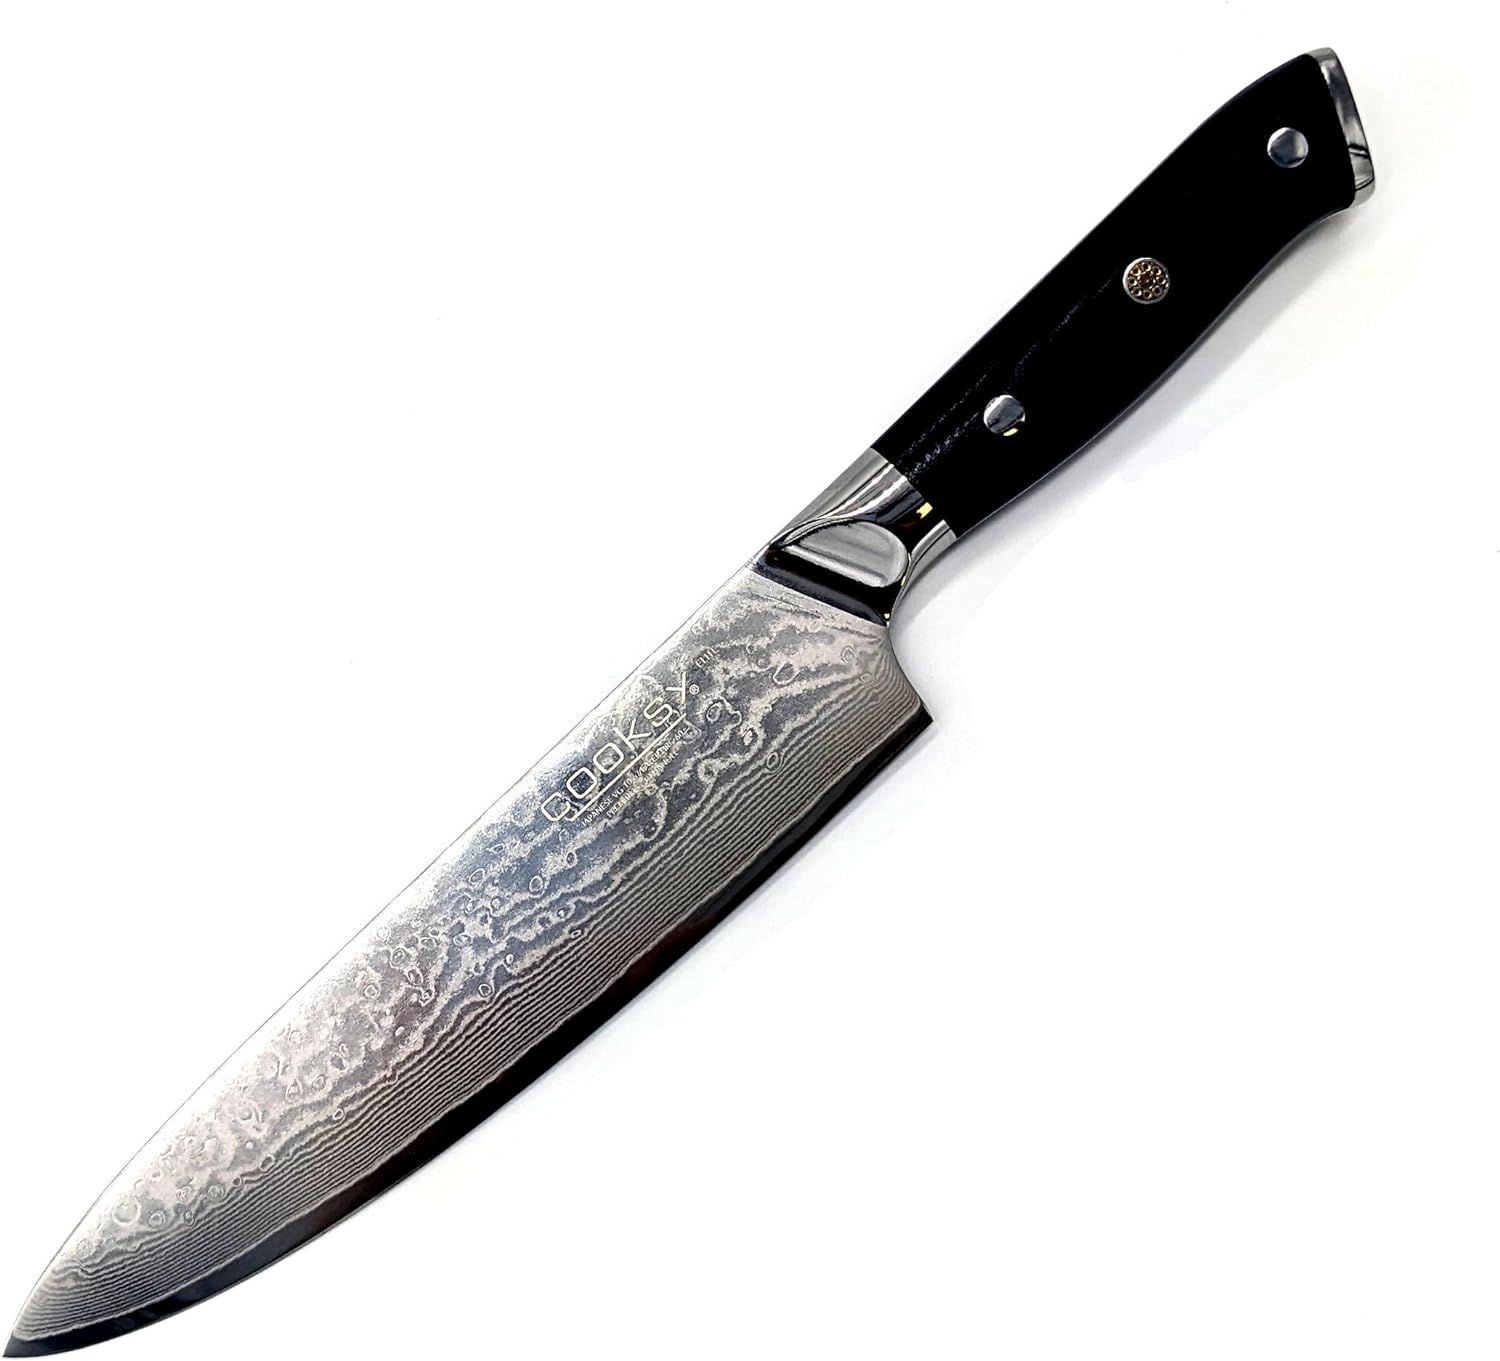 Elite Series: 8 inch Chef's Knife VG-10 Damascus Stainless Steel Blade with G10 Handle | Cooksy